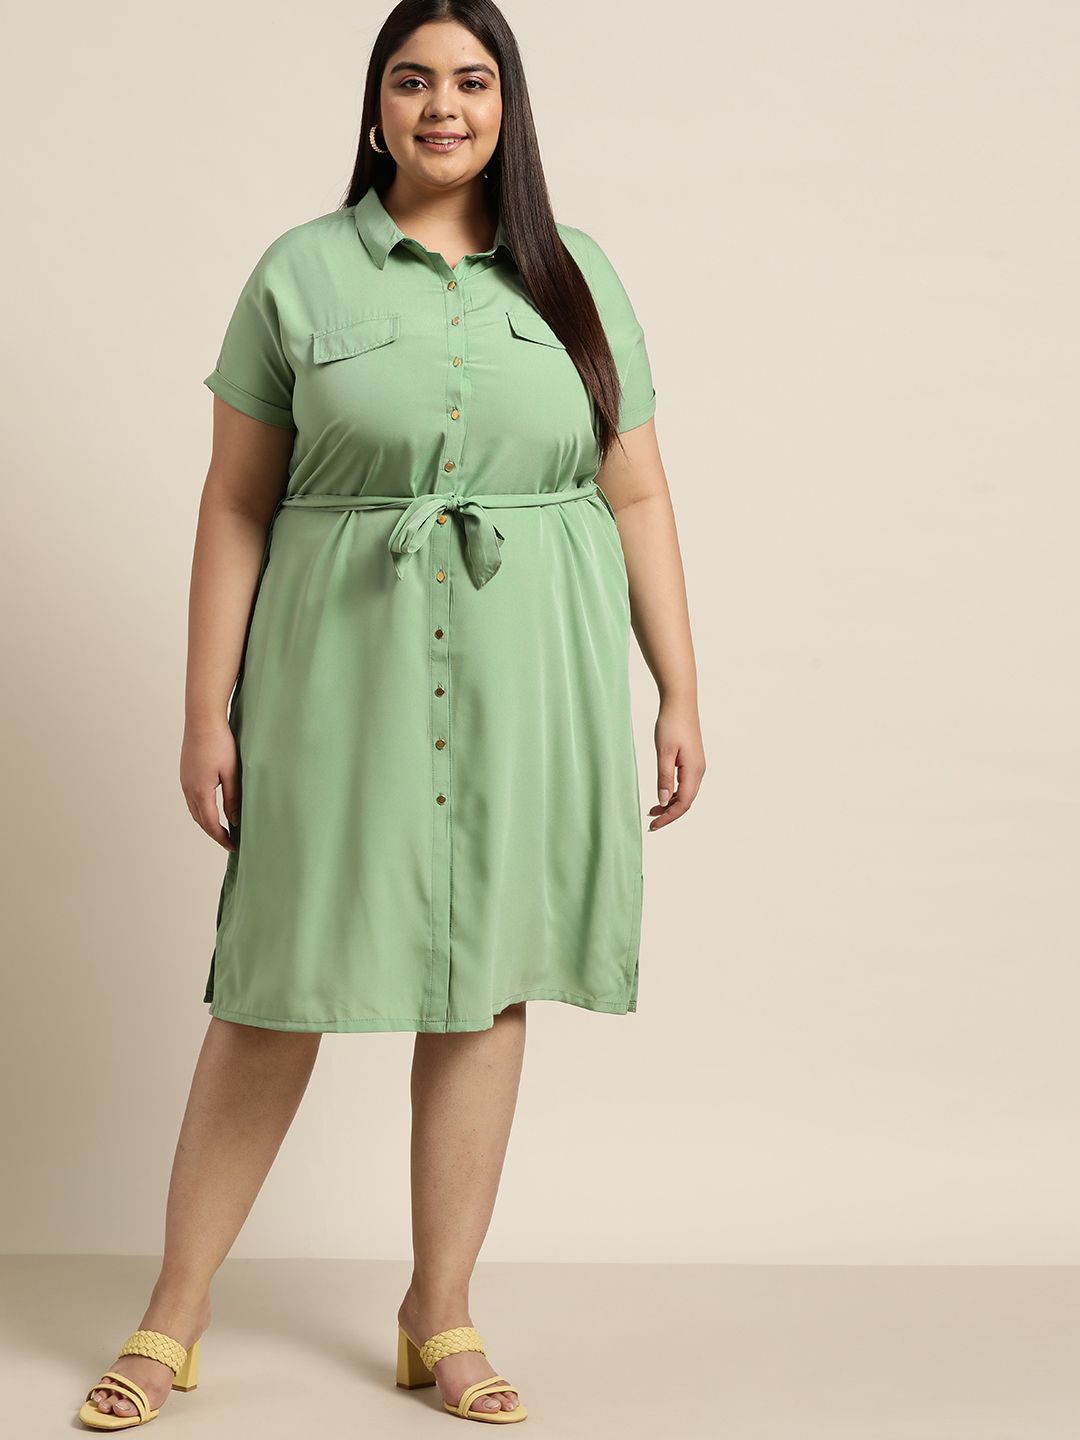 Sztori Women Plus Size Green Solid Shirt Dress with Belt Price in India